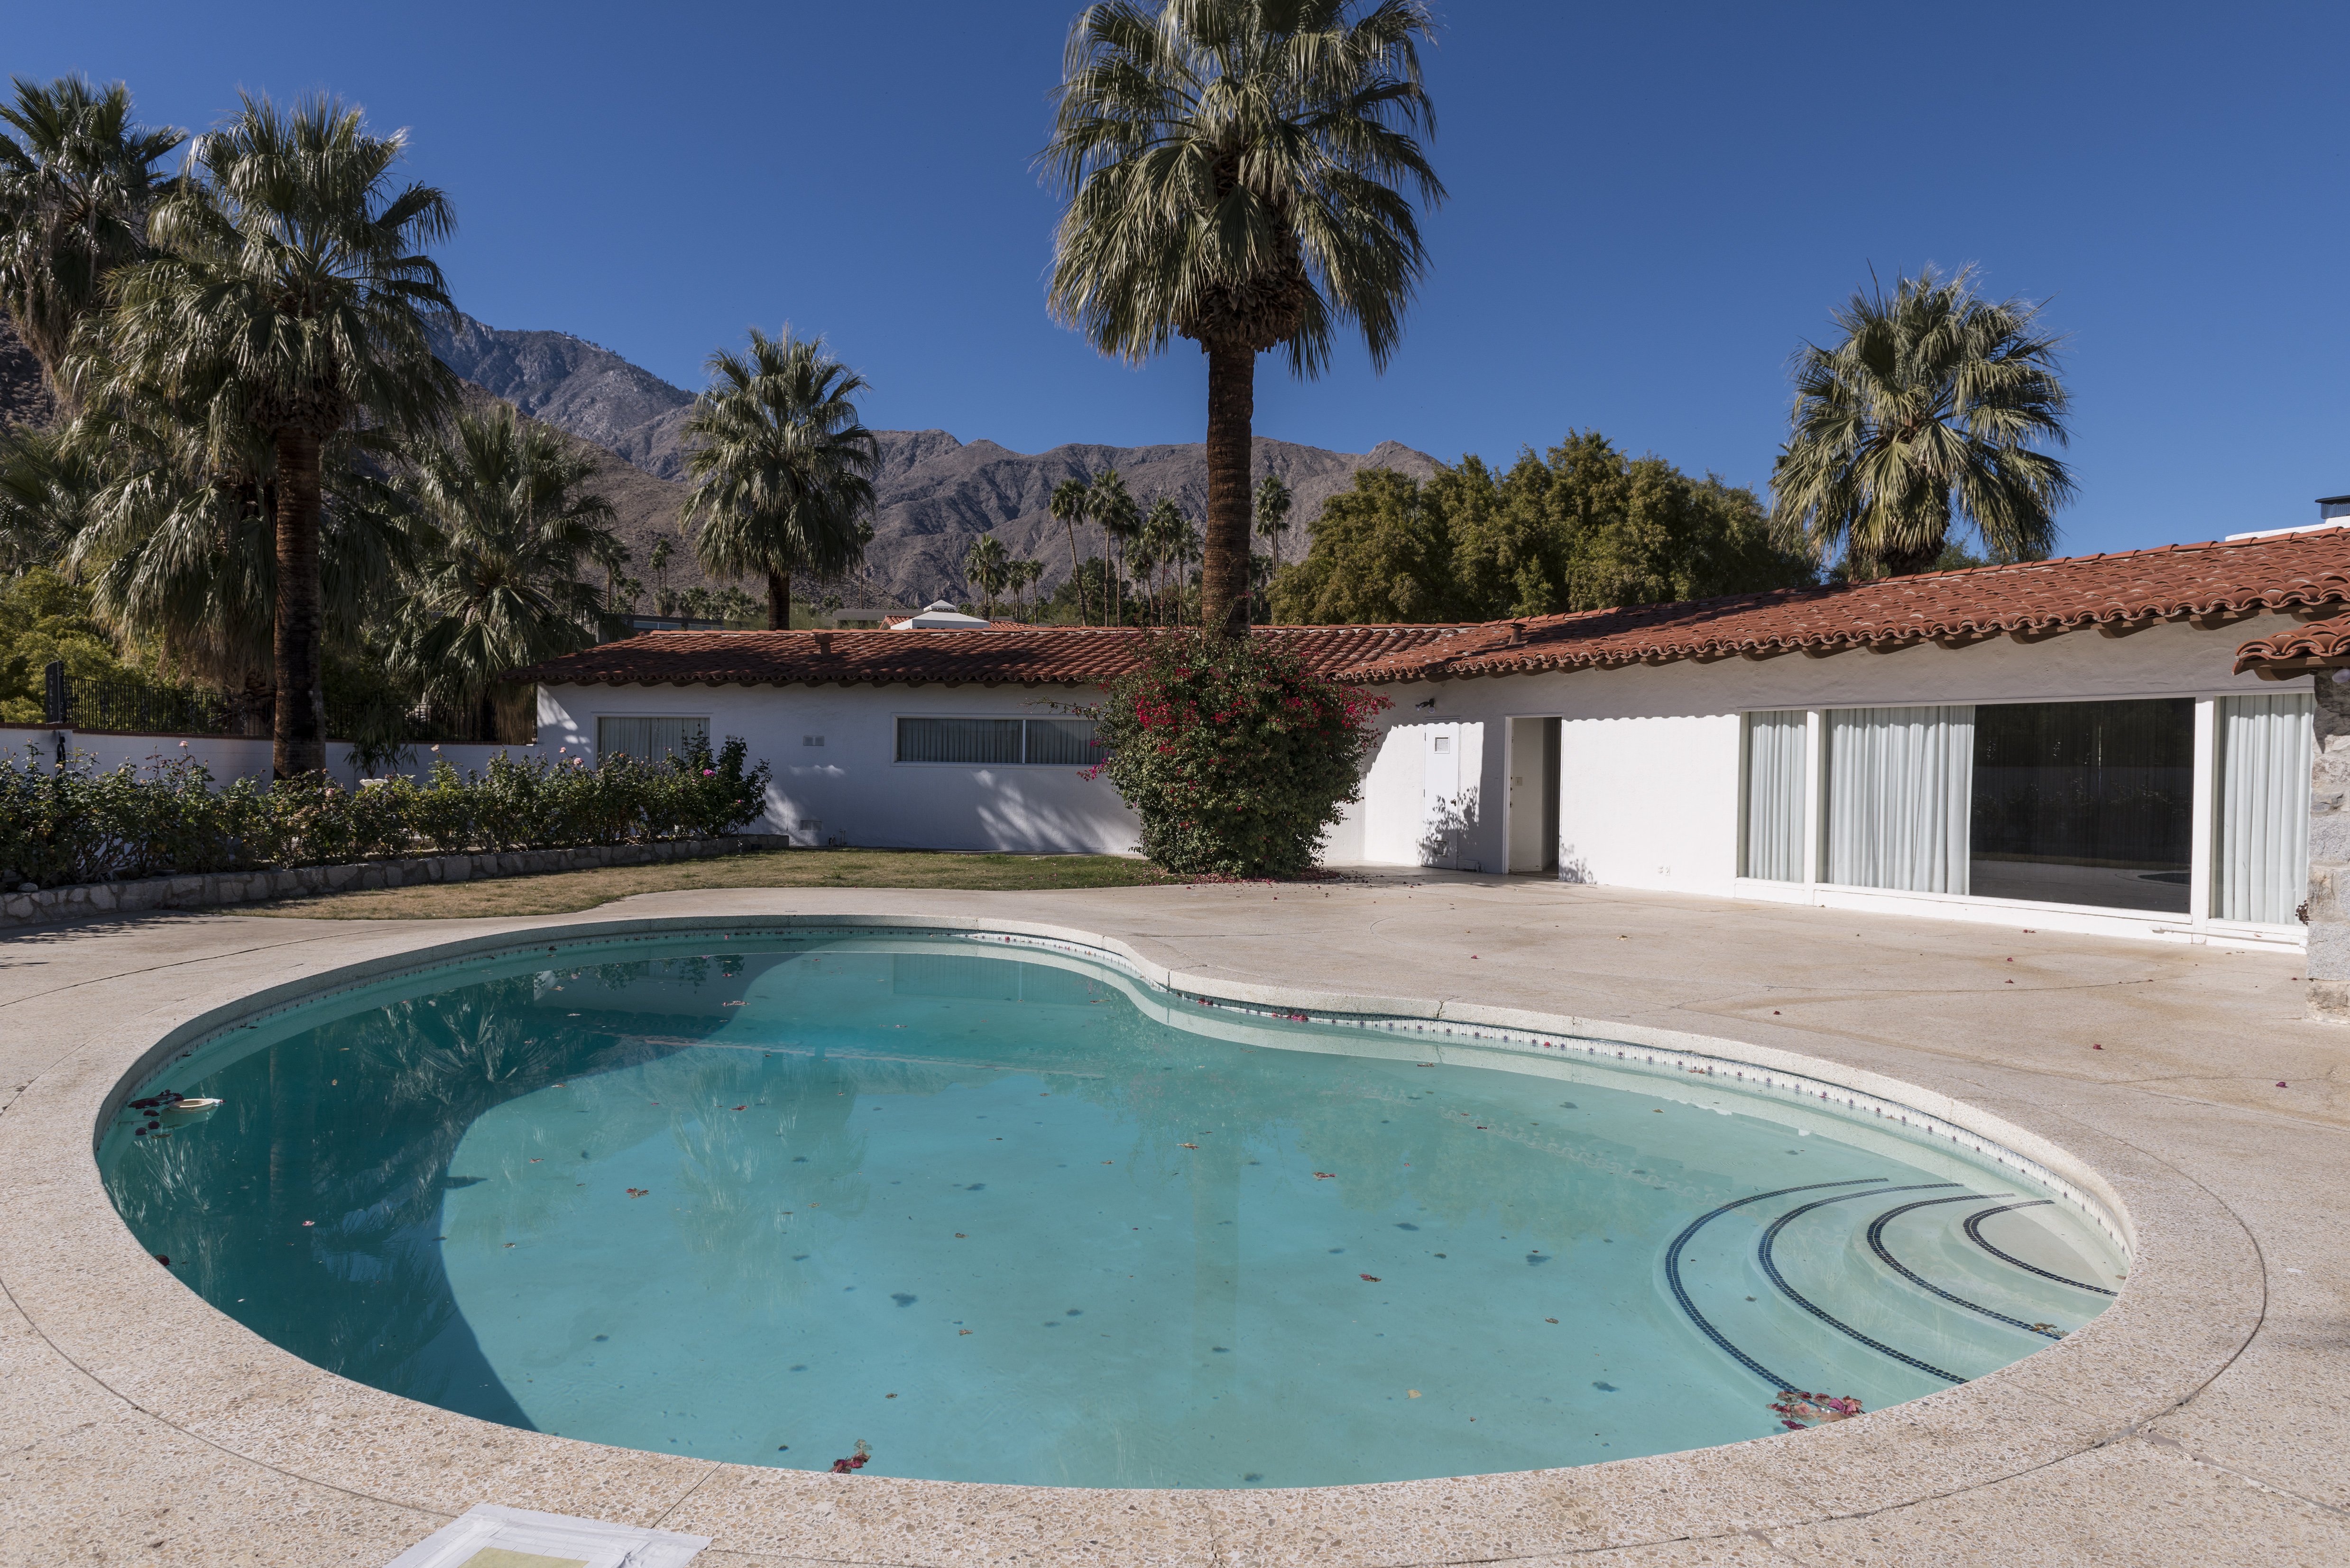  Pool view of a house in Palm Springs, California, one of only two homes to be owned by singer Elvis Presley | Photo: Getty Images